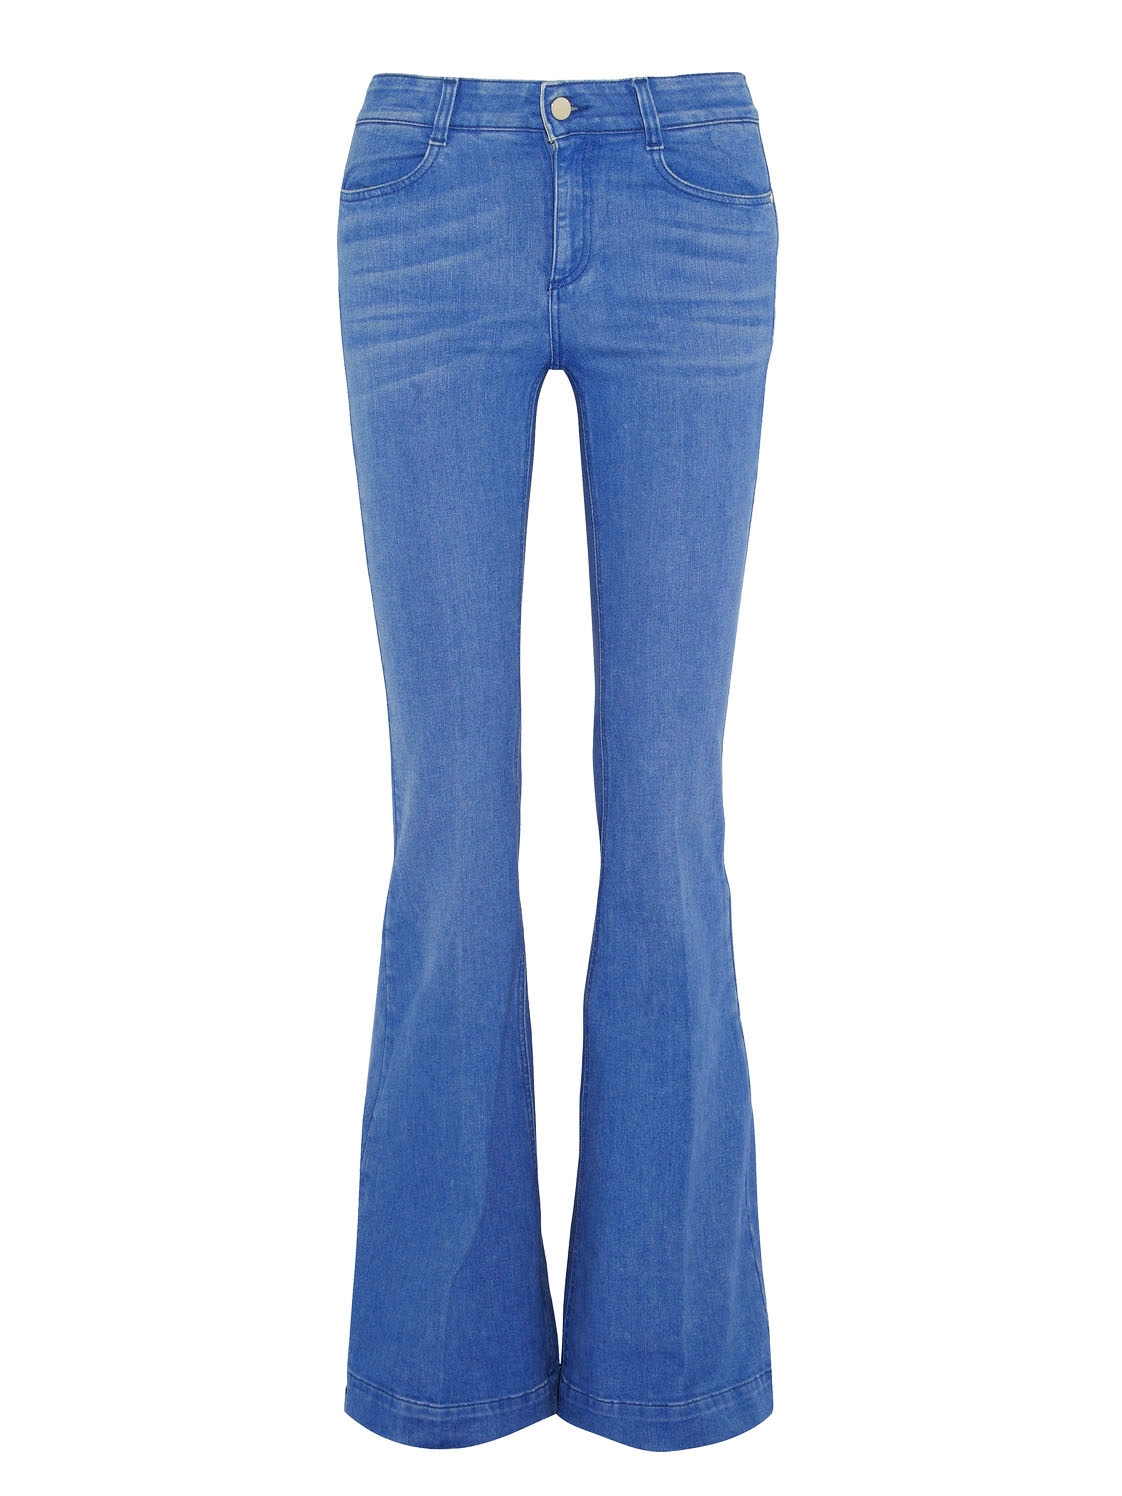 Stella McCartney Denim Relaxed-fitting Jeans in Light Blue Blue Womens Clothing Jeans Wide-leg jeans 